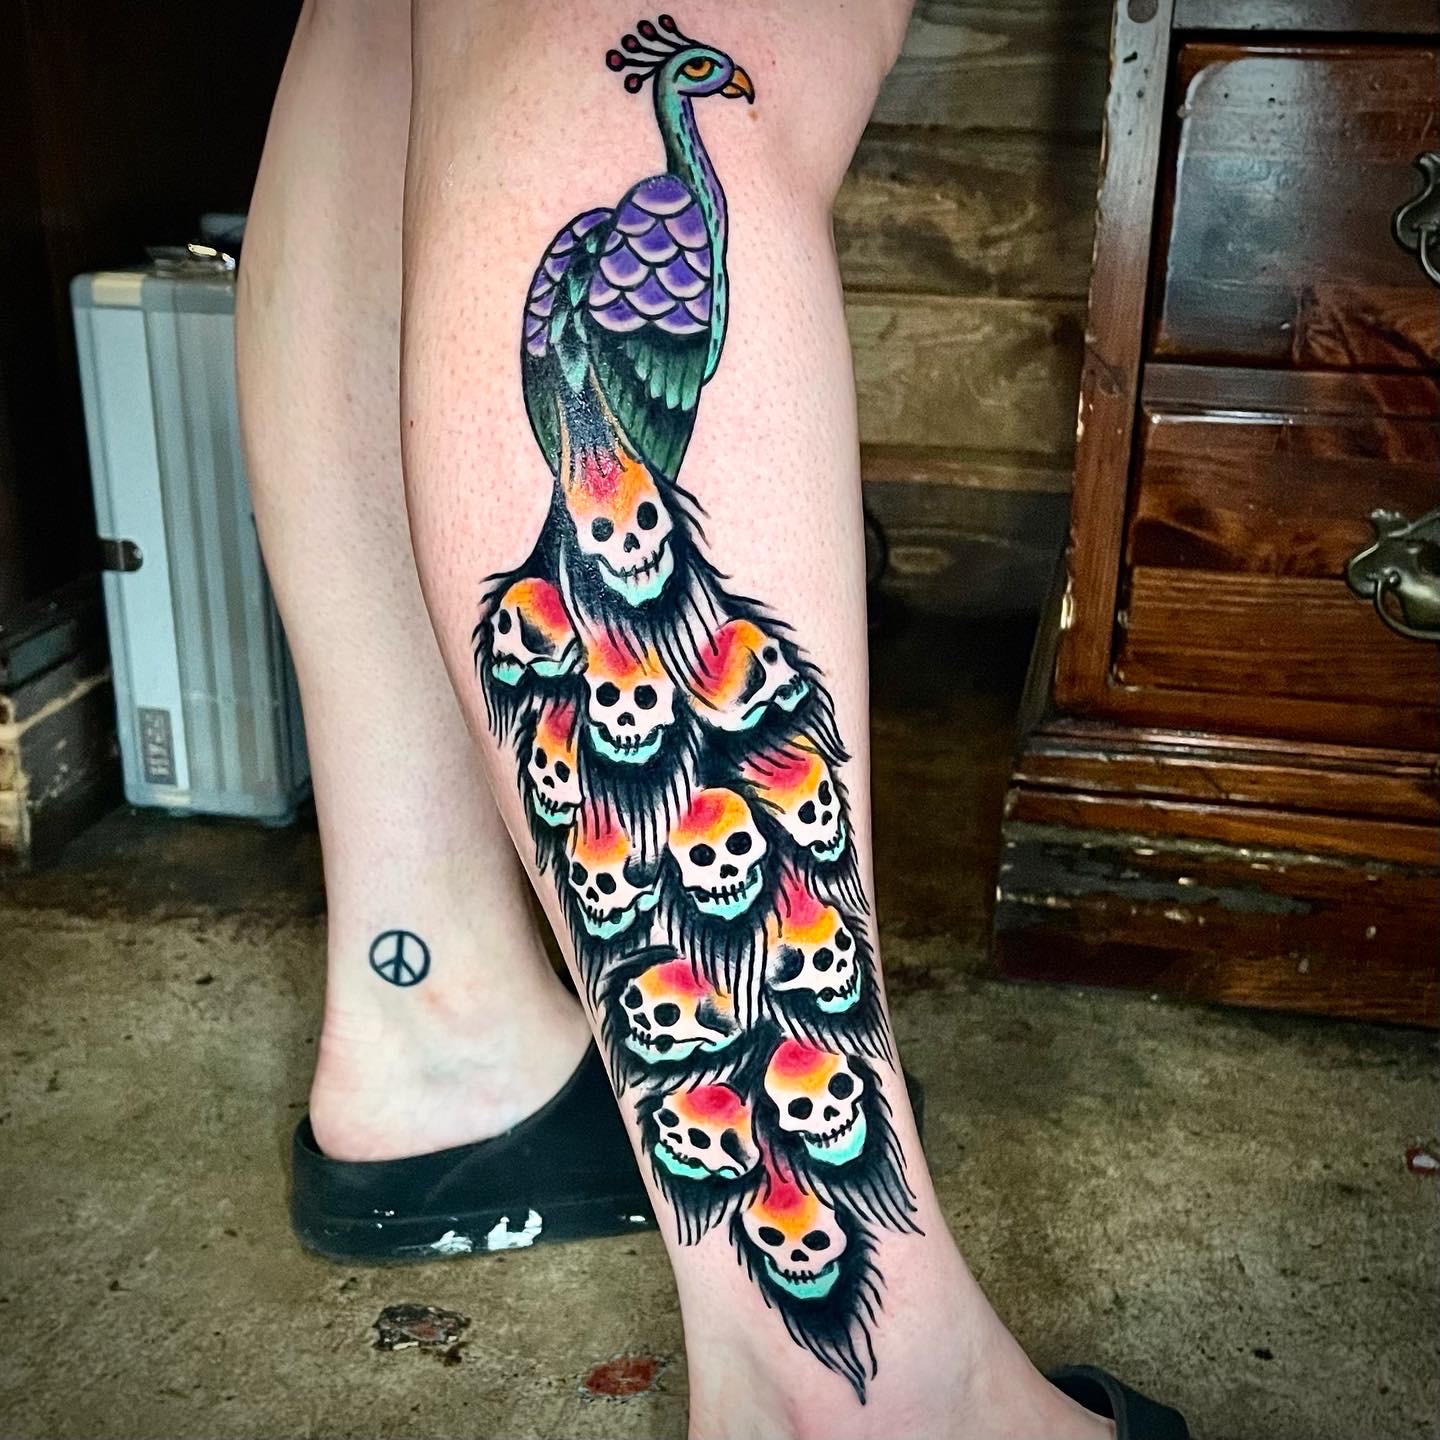 Tattoo of skulls and a peacock